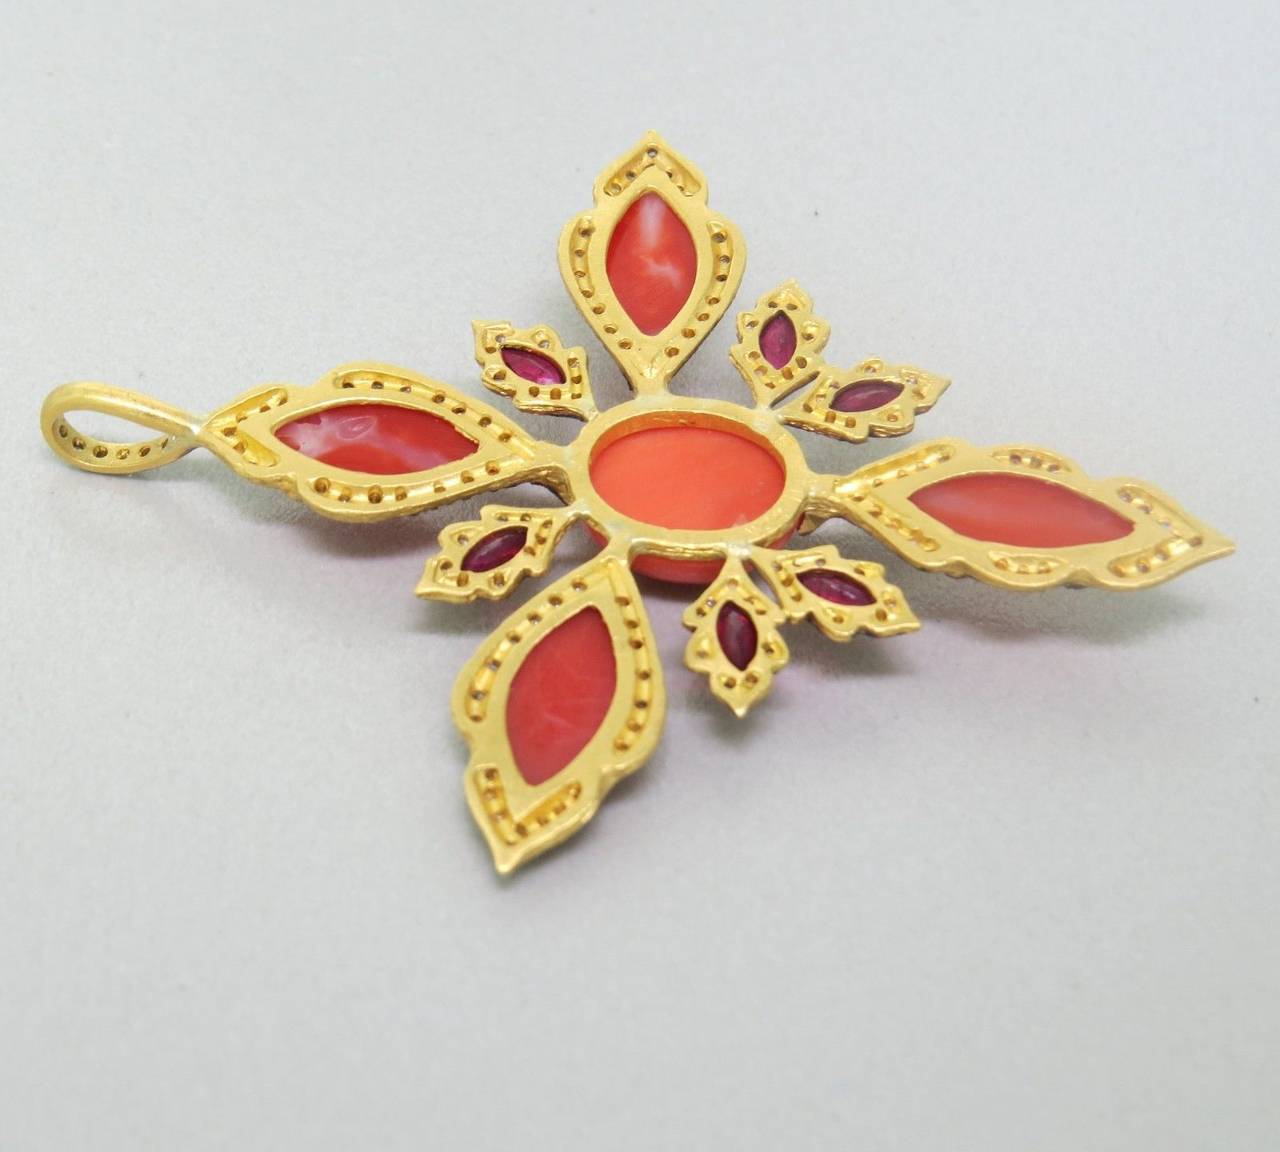 Sensational Cathy Waterman 22K yellow gold pendant featuring coral, rubies and diamonds. Pendant is 64mm x 50mm.  Pendant retails for $15,780!